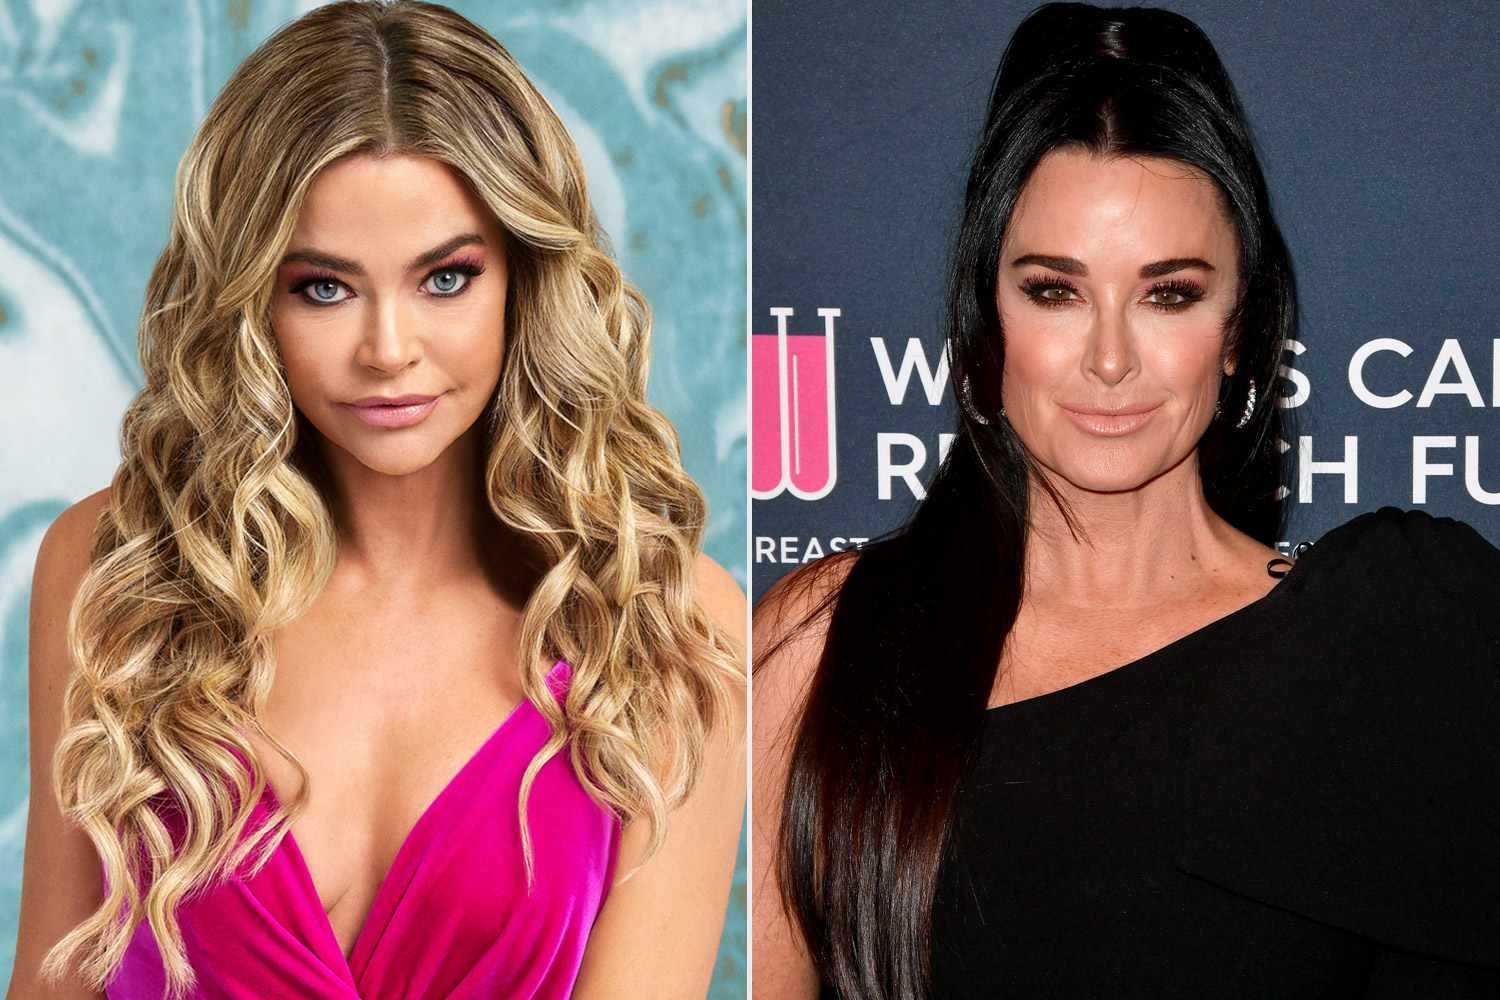 Denise Richards laughed off Kyle Richards' jibe in iconic The Real Housewives of Beverly Hills moment